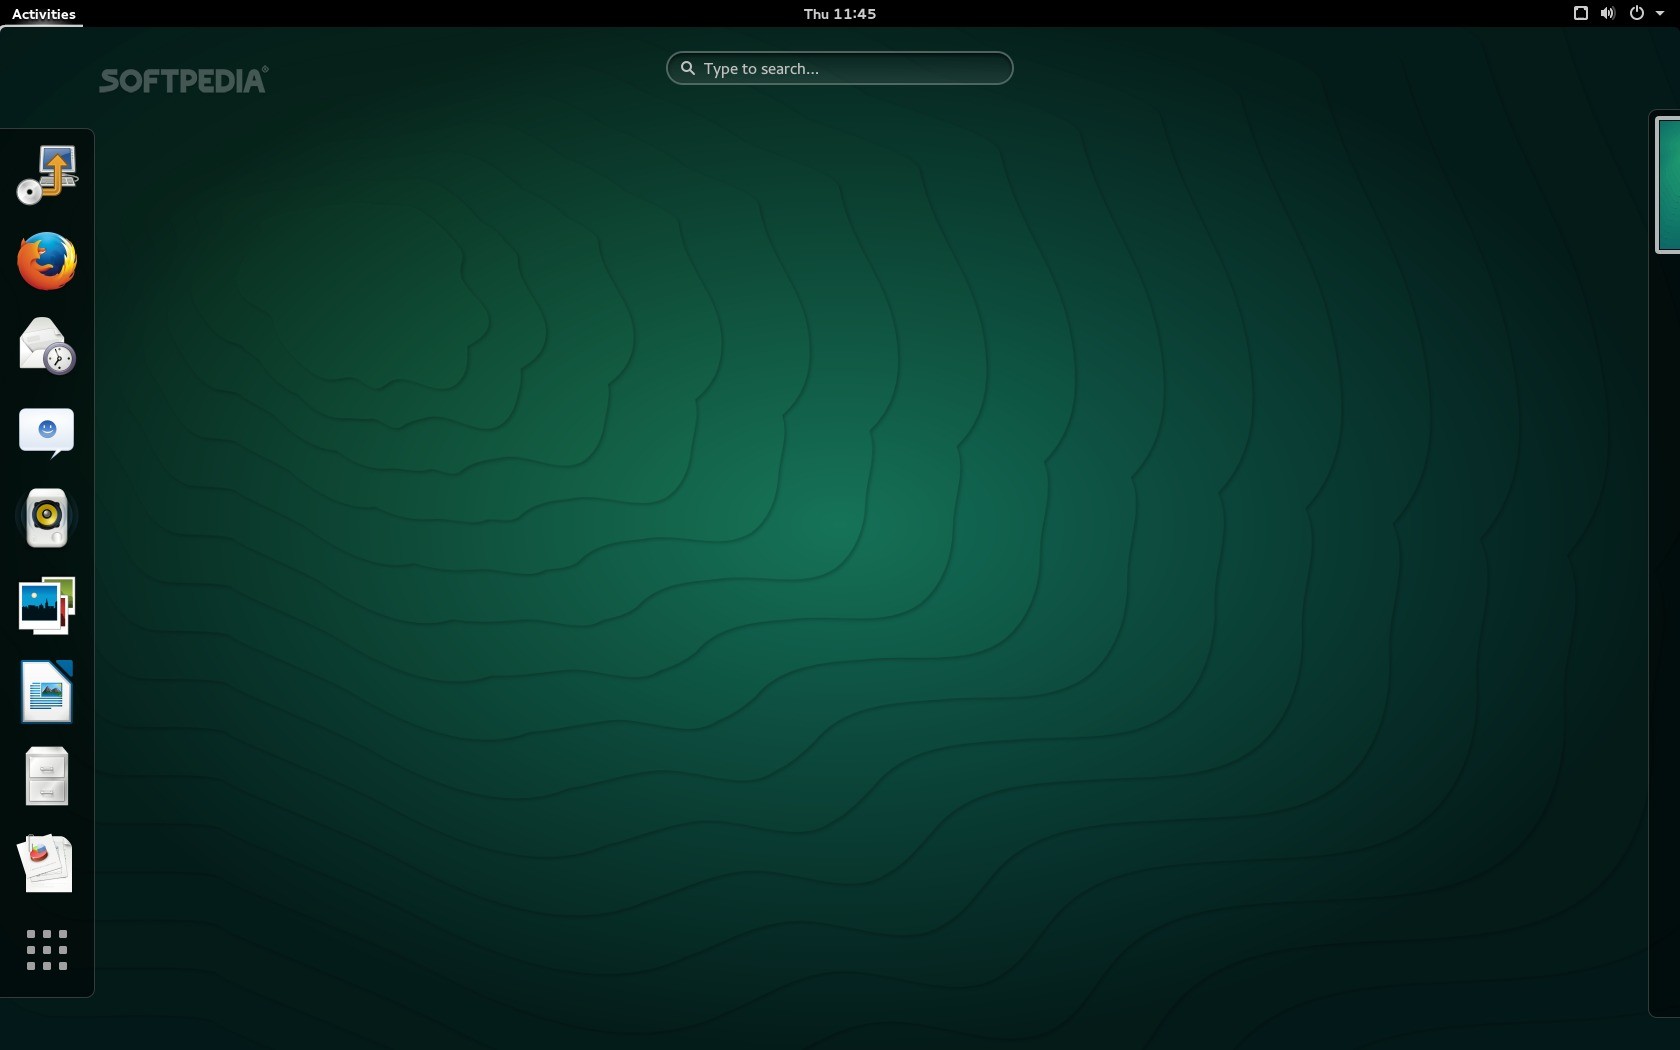 opensuse 15.4